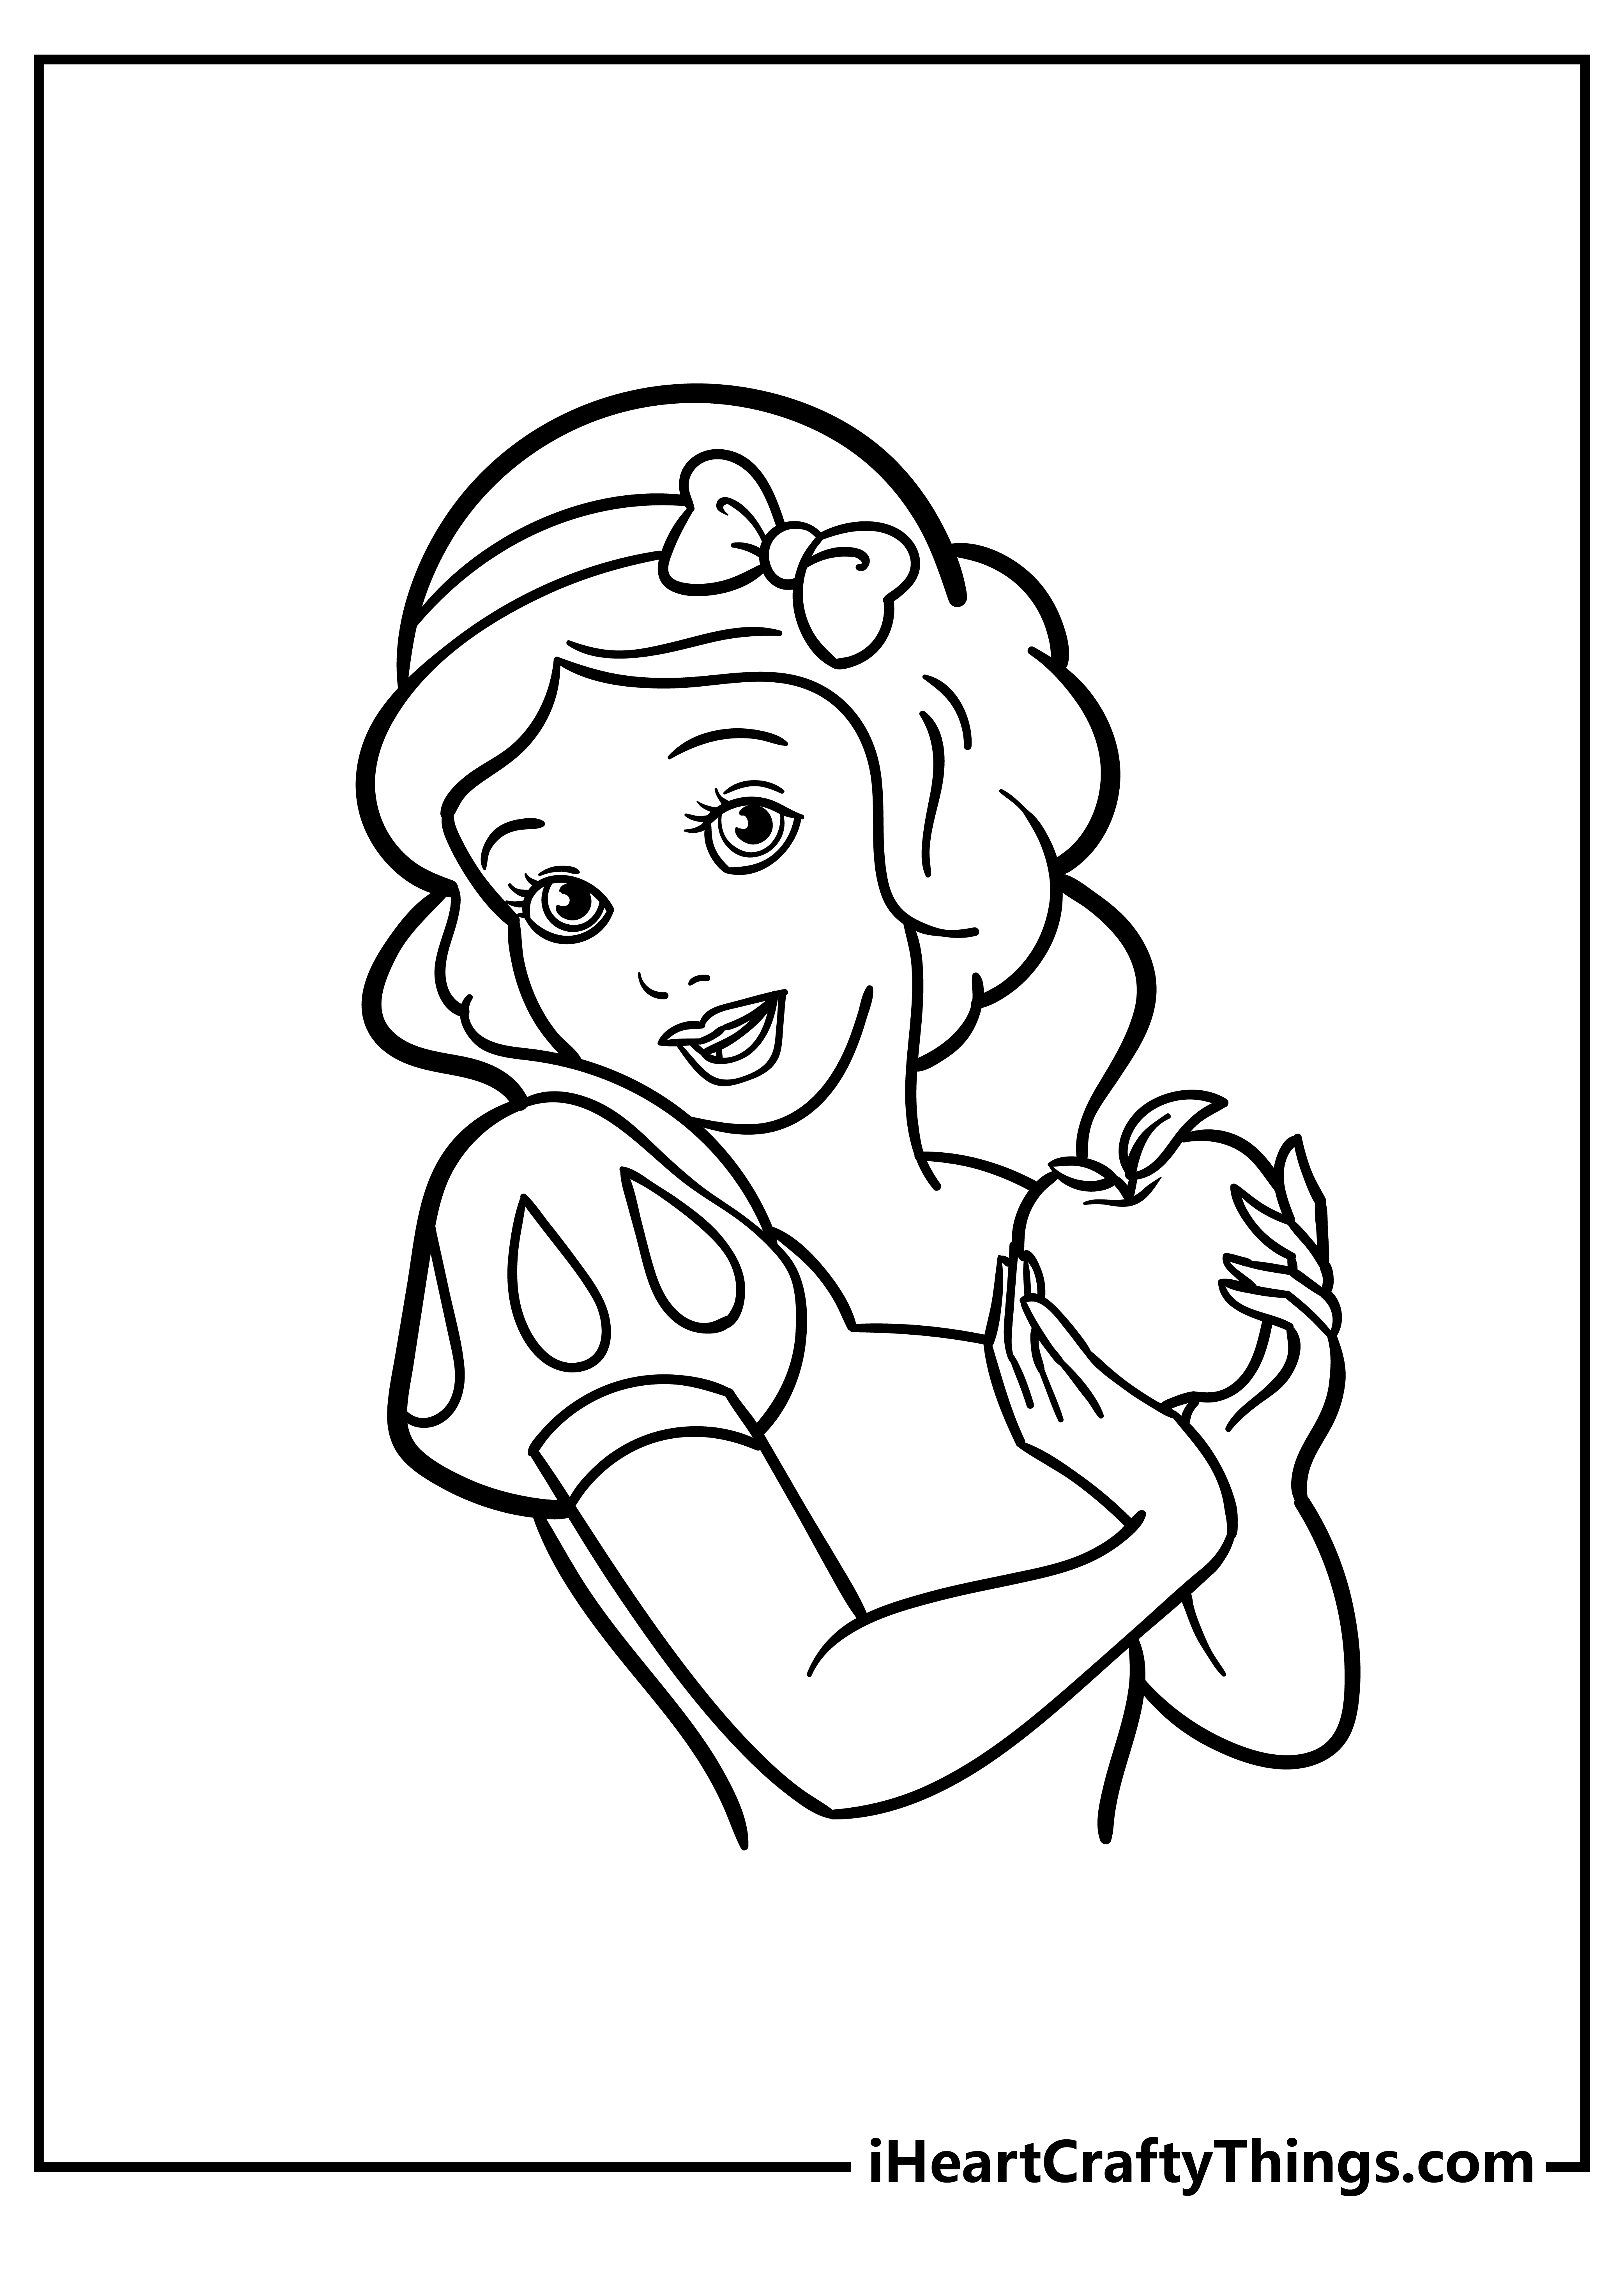 Snow White Coloring Pages for kids free download